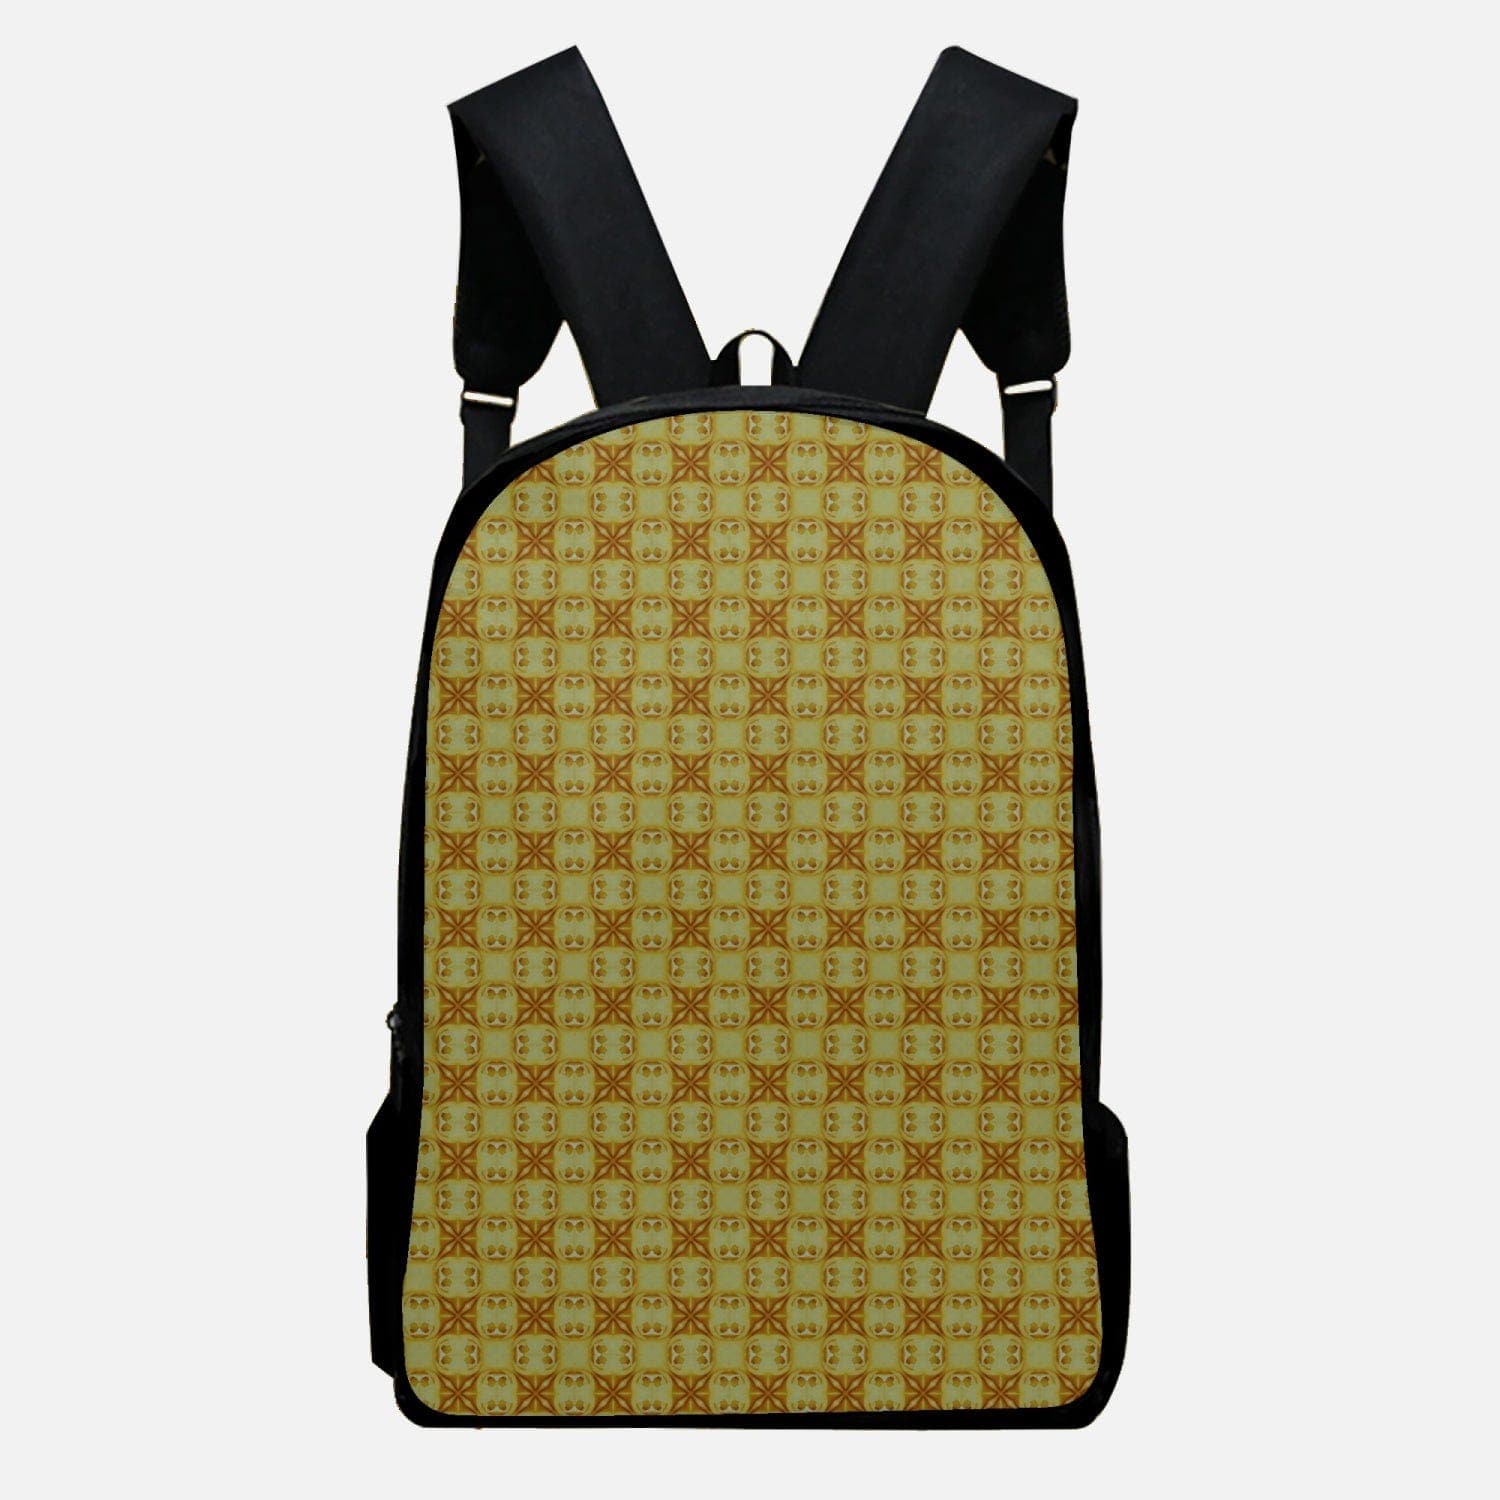 Yellow rosy pattern, Oxford Bags Backpack Set 3pcs, designed by Sensus studio Design